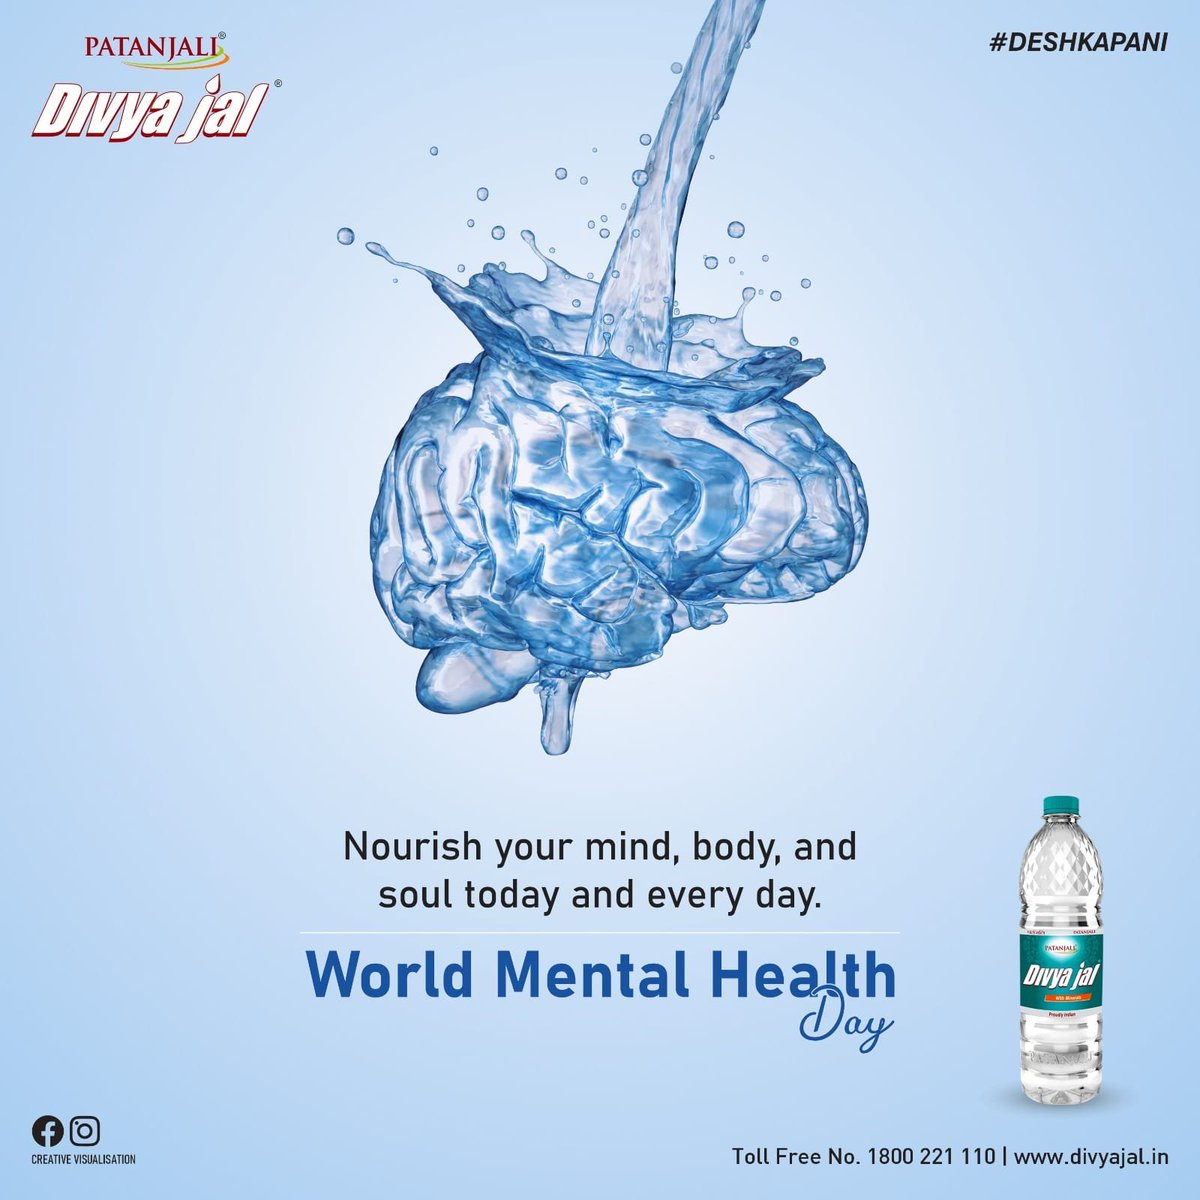 Stay Hydrated, stay mindful 
.
.
#worldmentalhealthday #mentalhealthawareness #mentalhealth #mentalhealthday2023 #stayrefreshed #stayhydrated #patanjaliwater #Patanjali #PatanjaliDivyaJal #purewater